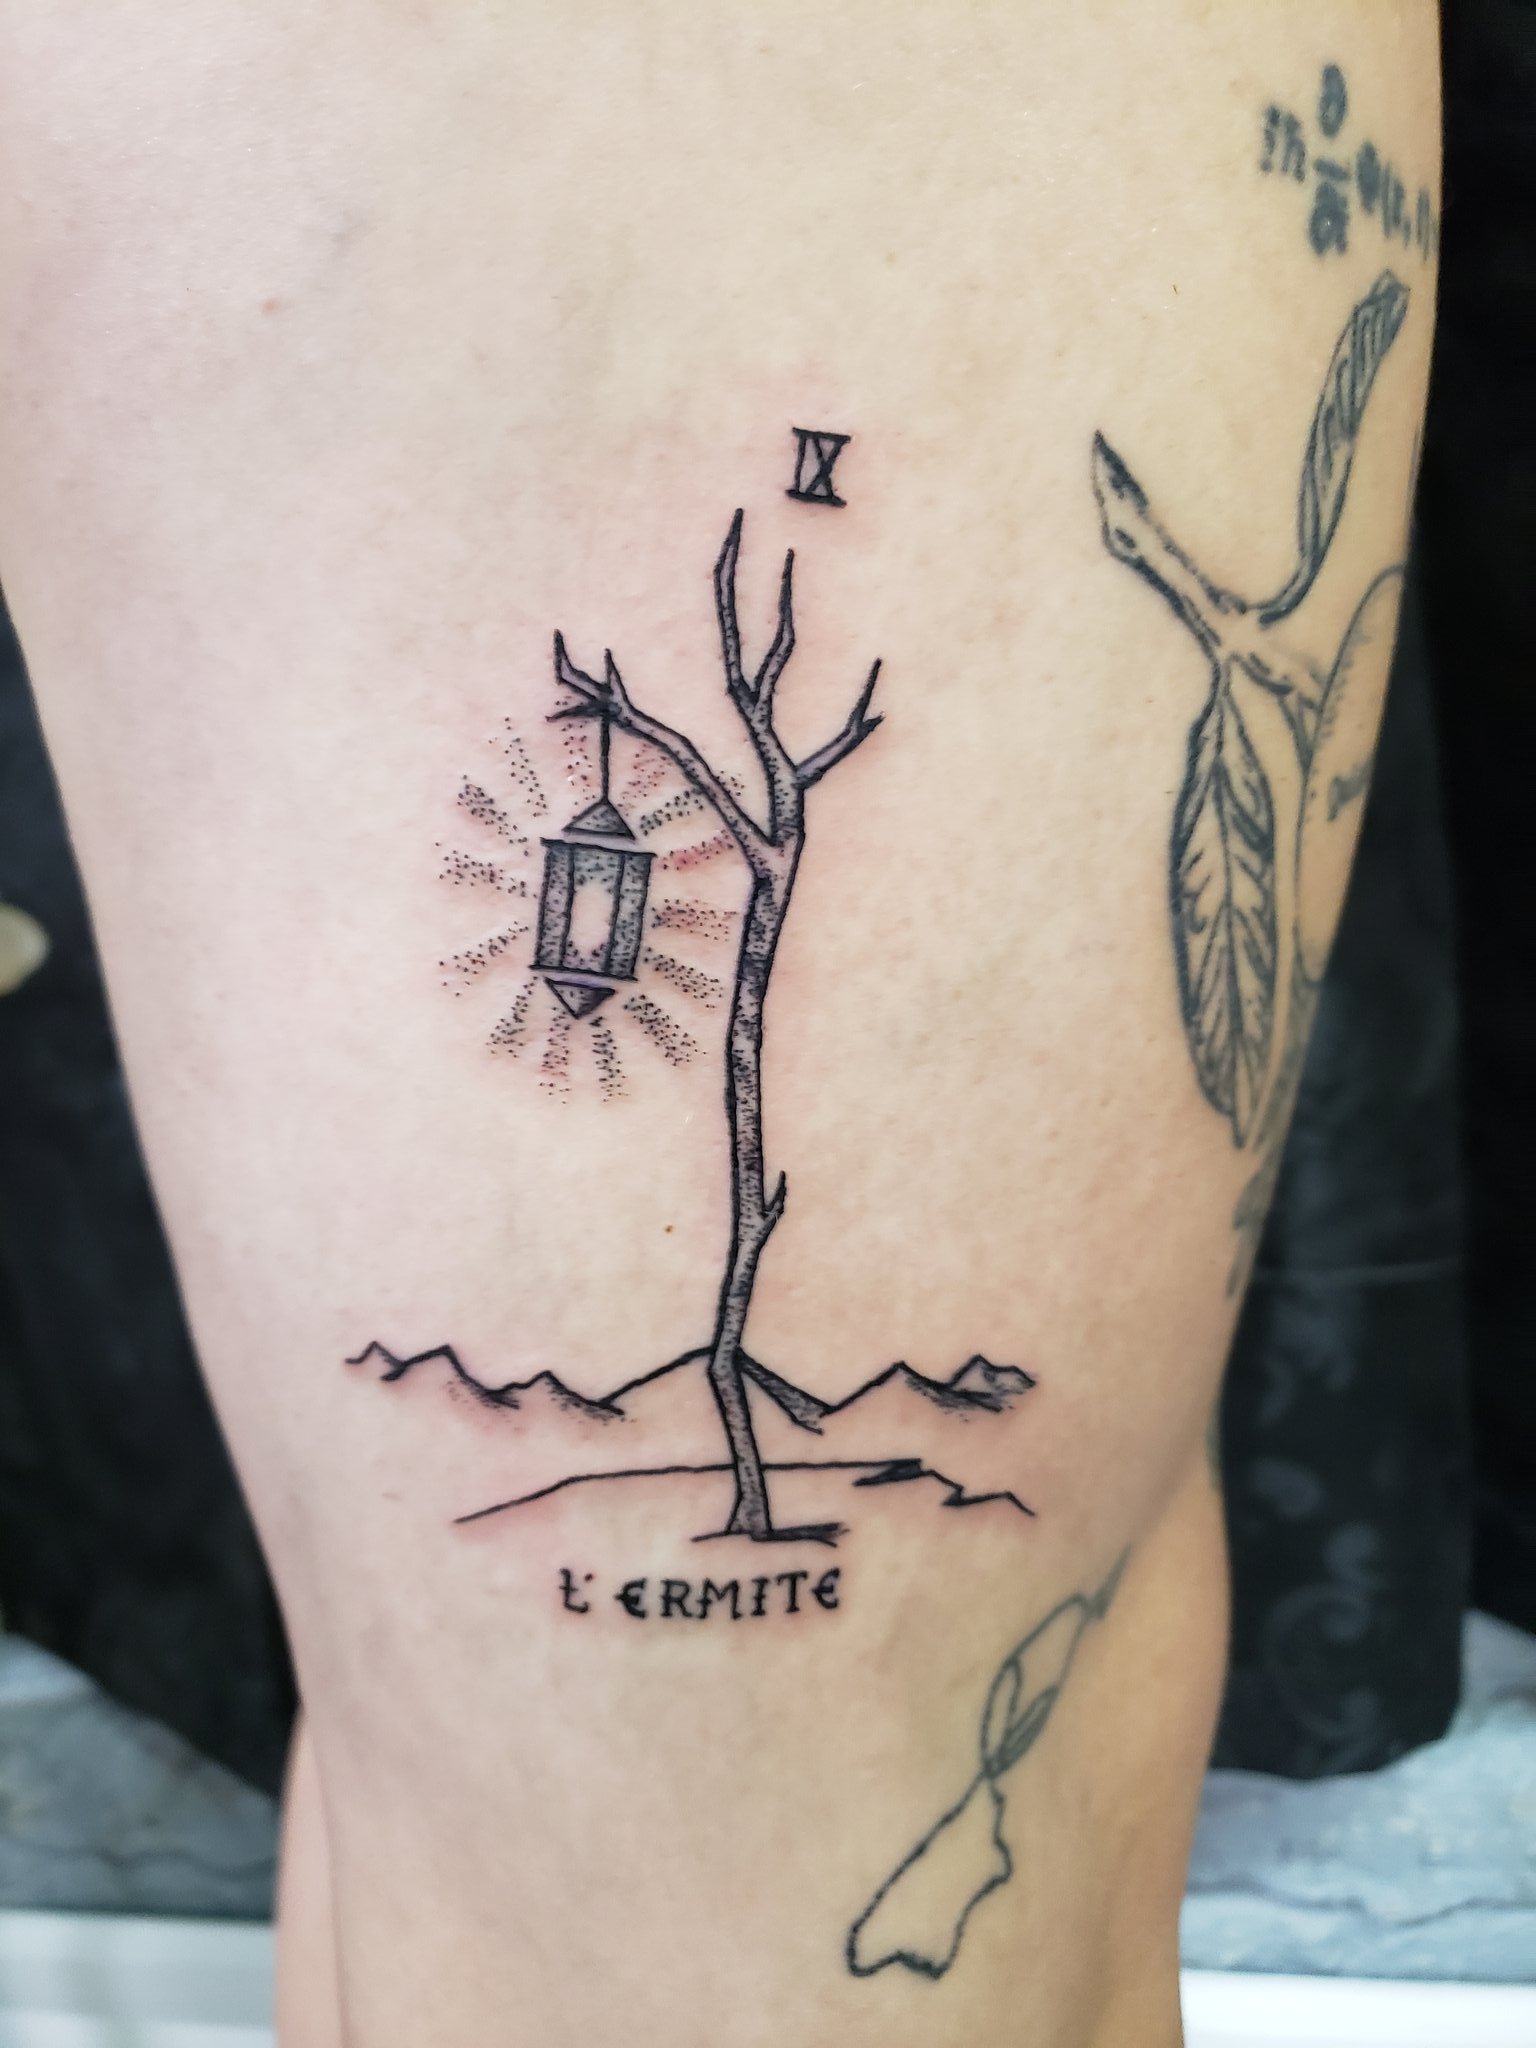 Empleador libro de bolsillo Cuaderno The Cardinal Skin Art & Gallery on Twitter: "French "Hermit" tarot card  tattoo by Rosemary https://t.co/xqdVfrN1MS" / Twitter